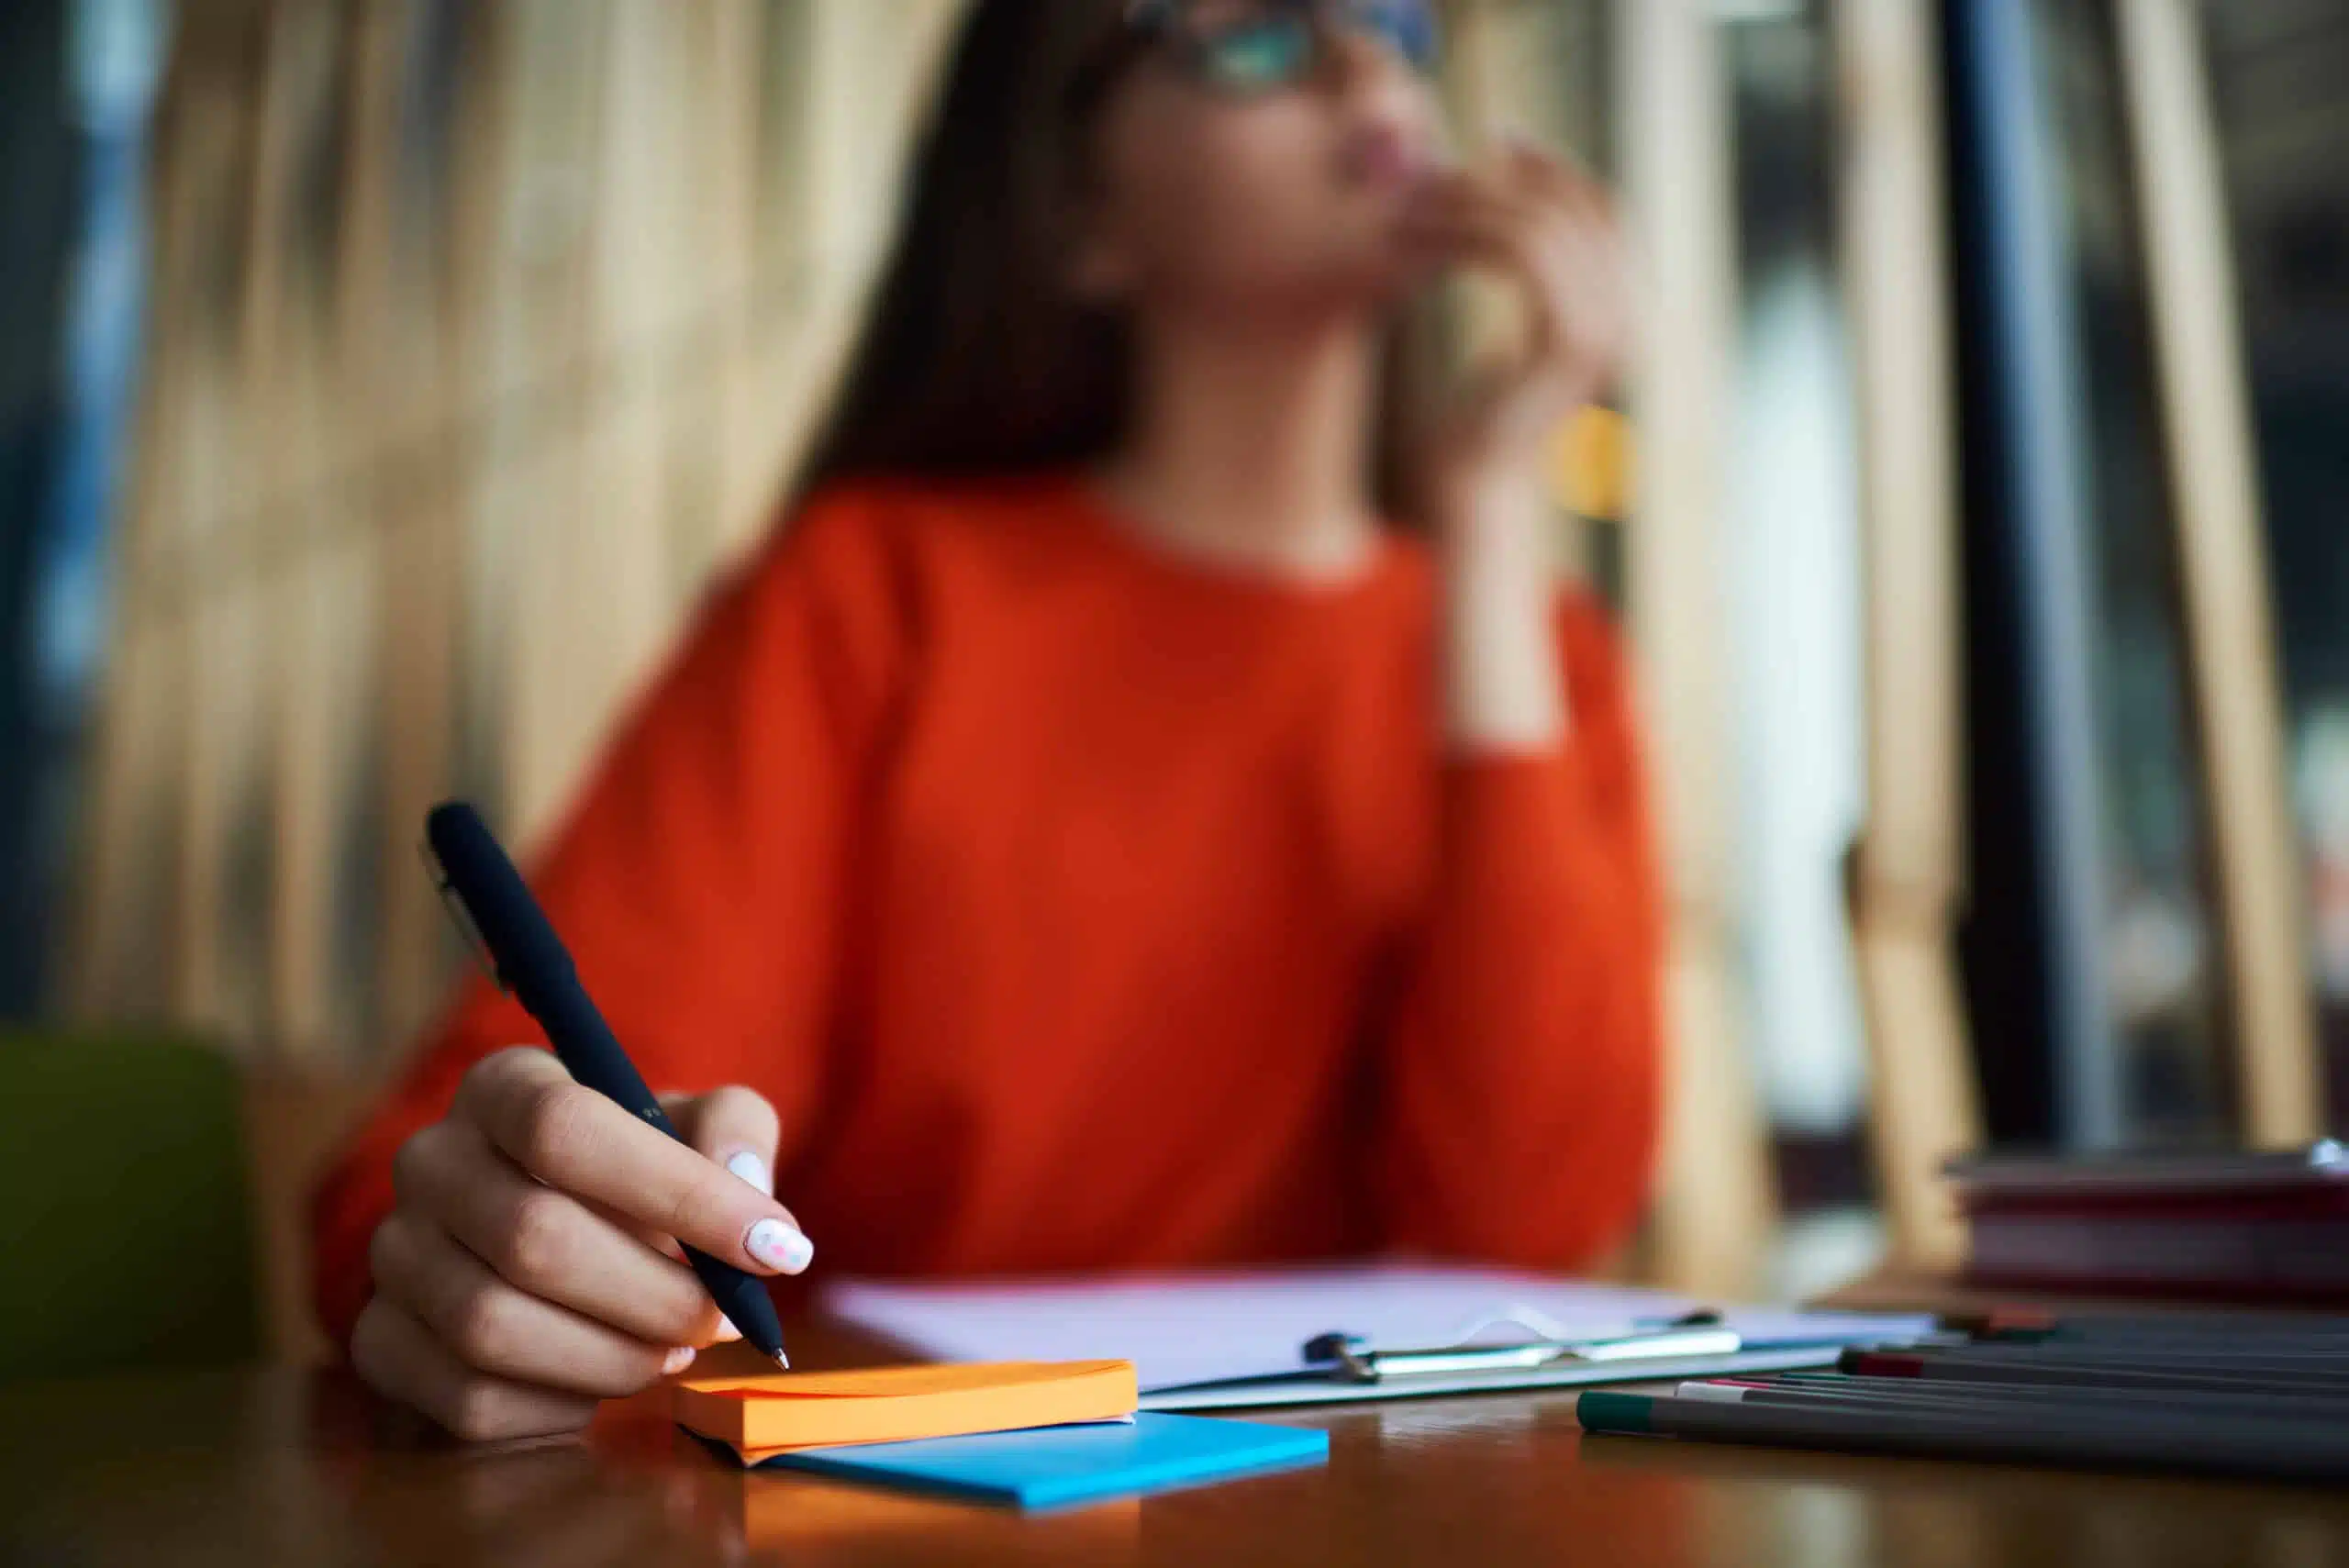 Pensive woman with glasses in red sweatshirt holding a pen, hand resting on her notes.